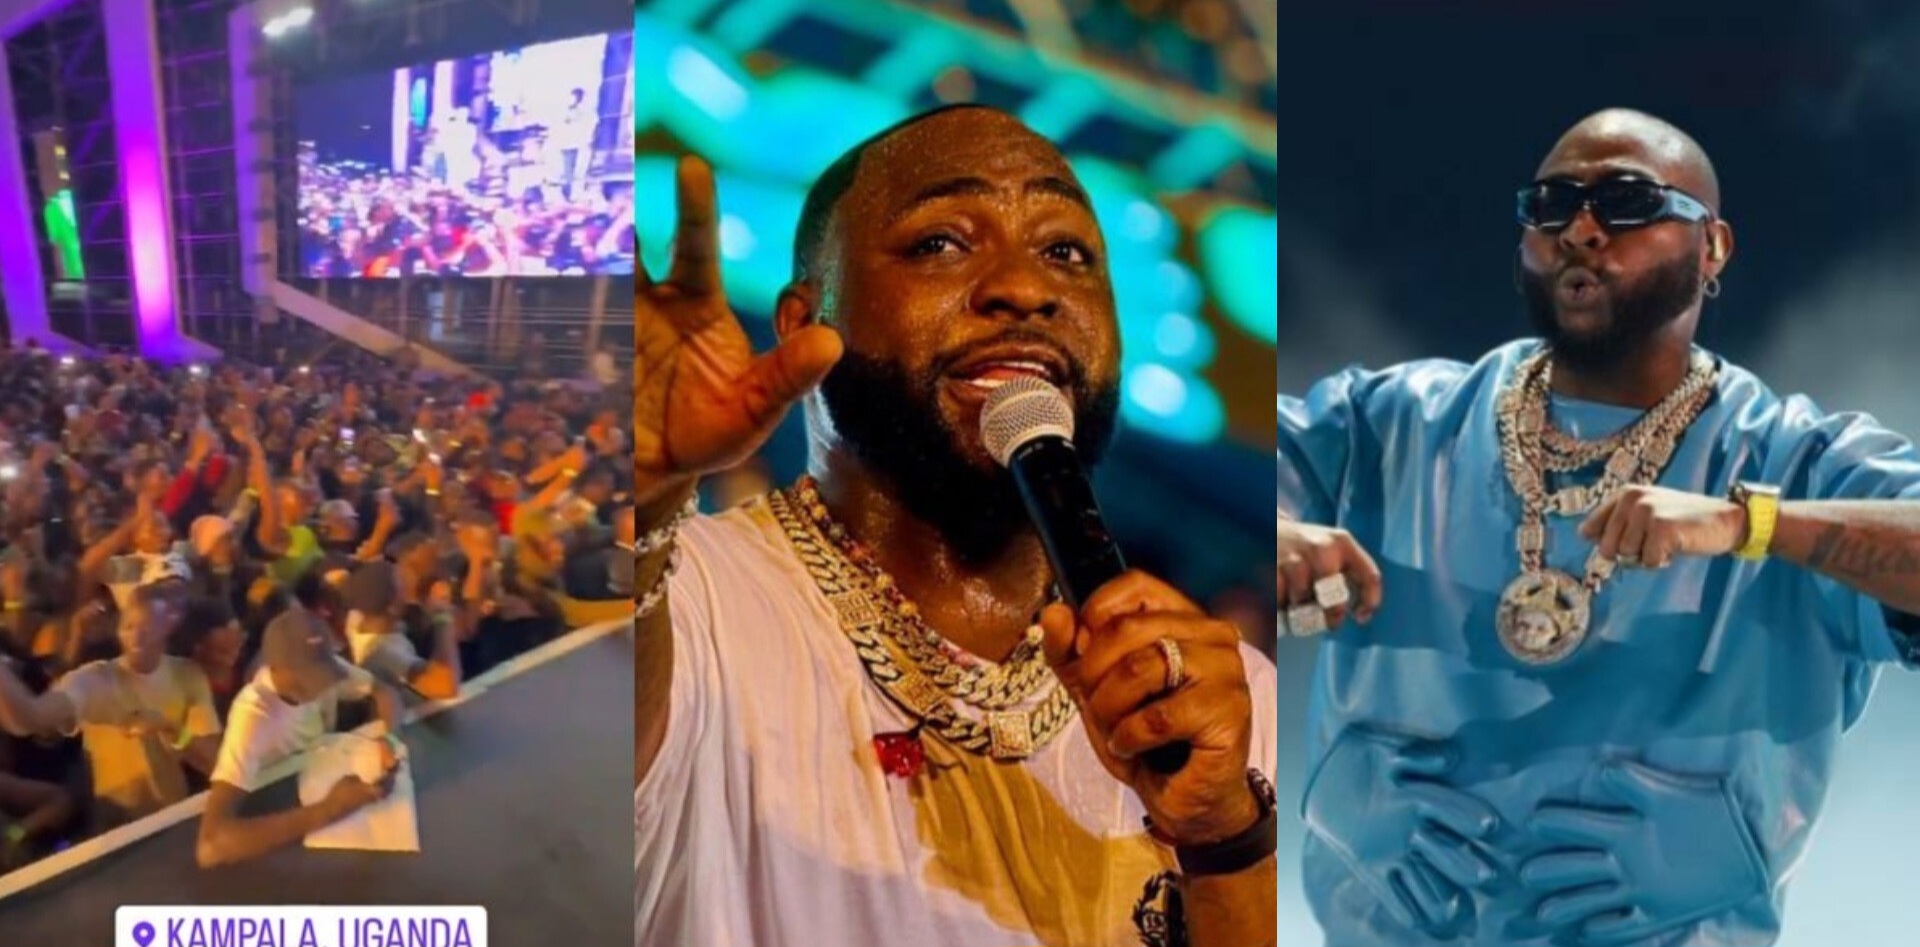 Davido's Fans Take Center Stage in Uganda, Demand 'Unavailable' After Singer Ends Concert Without It and reactions